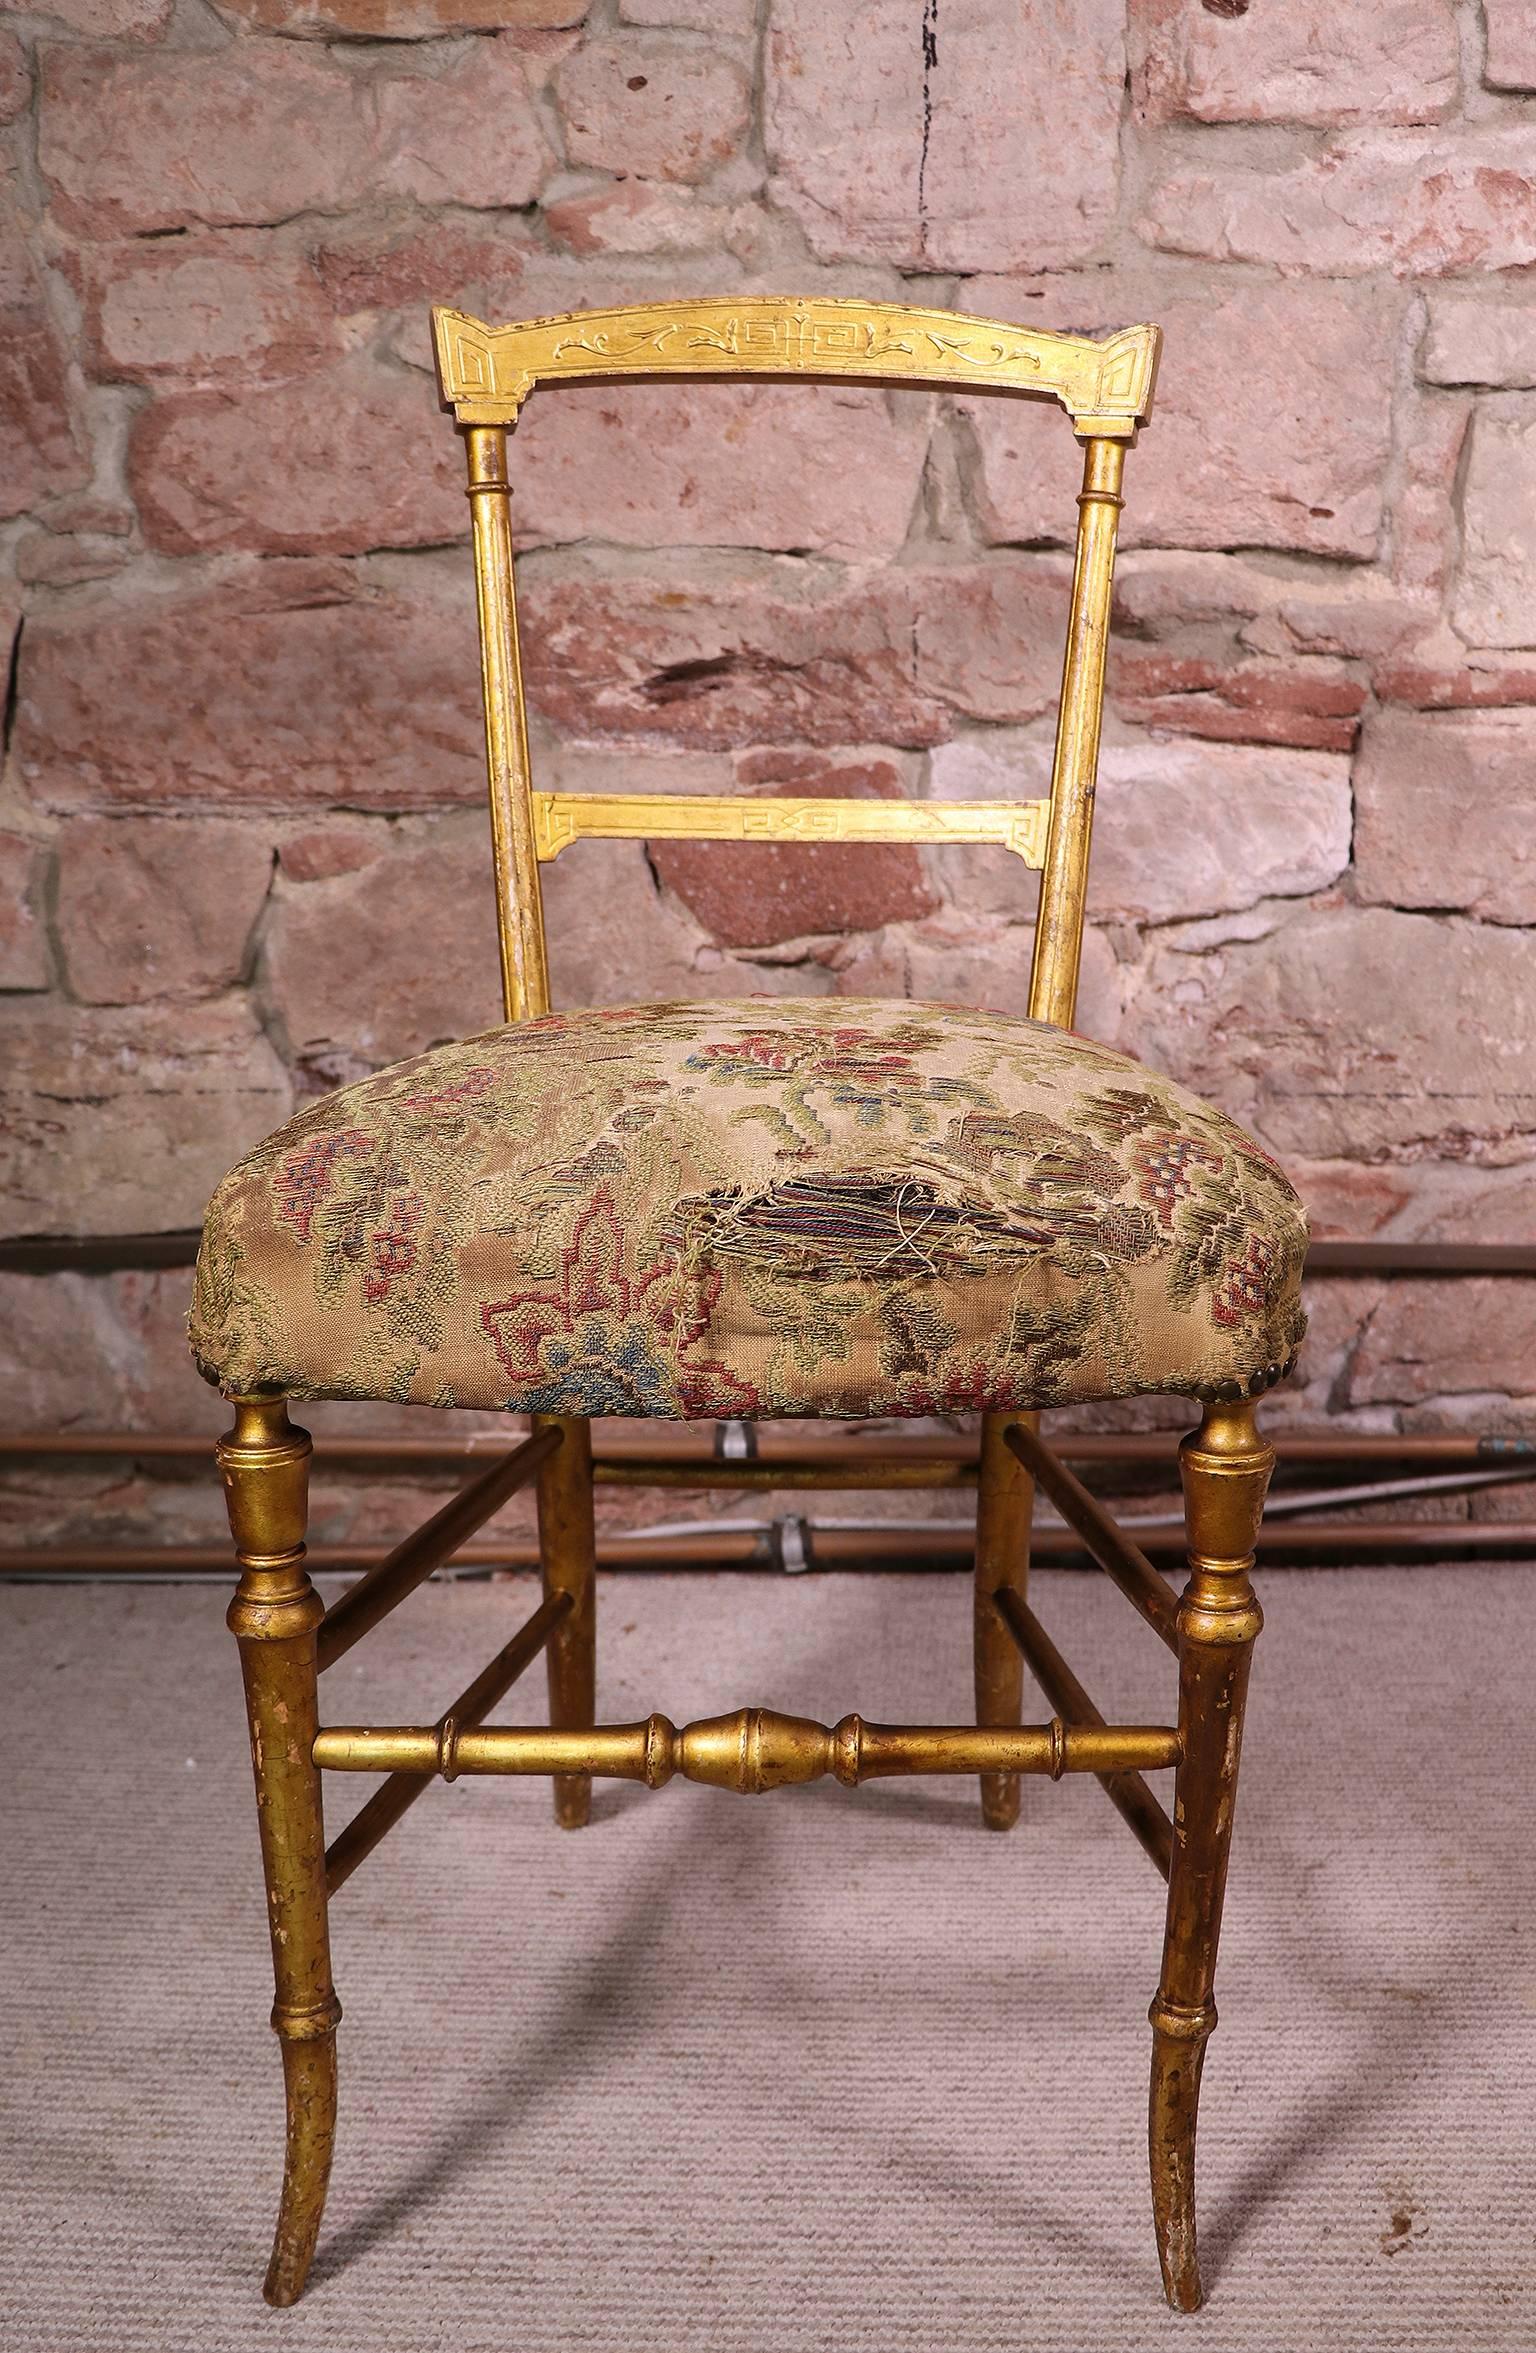 A delicate and elegant antique giltwood Chiavari chair made in Italy in the 19th century.
Original and wonderful naturally aged patination to the giltwood.
With elegant turned legs.
The upholstery should be renewed. 